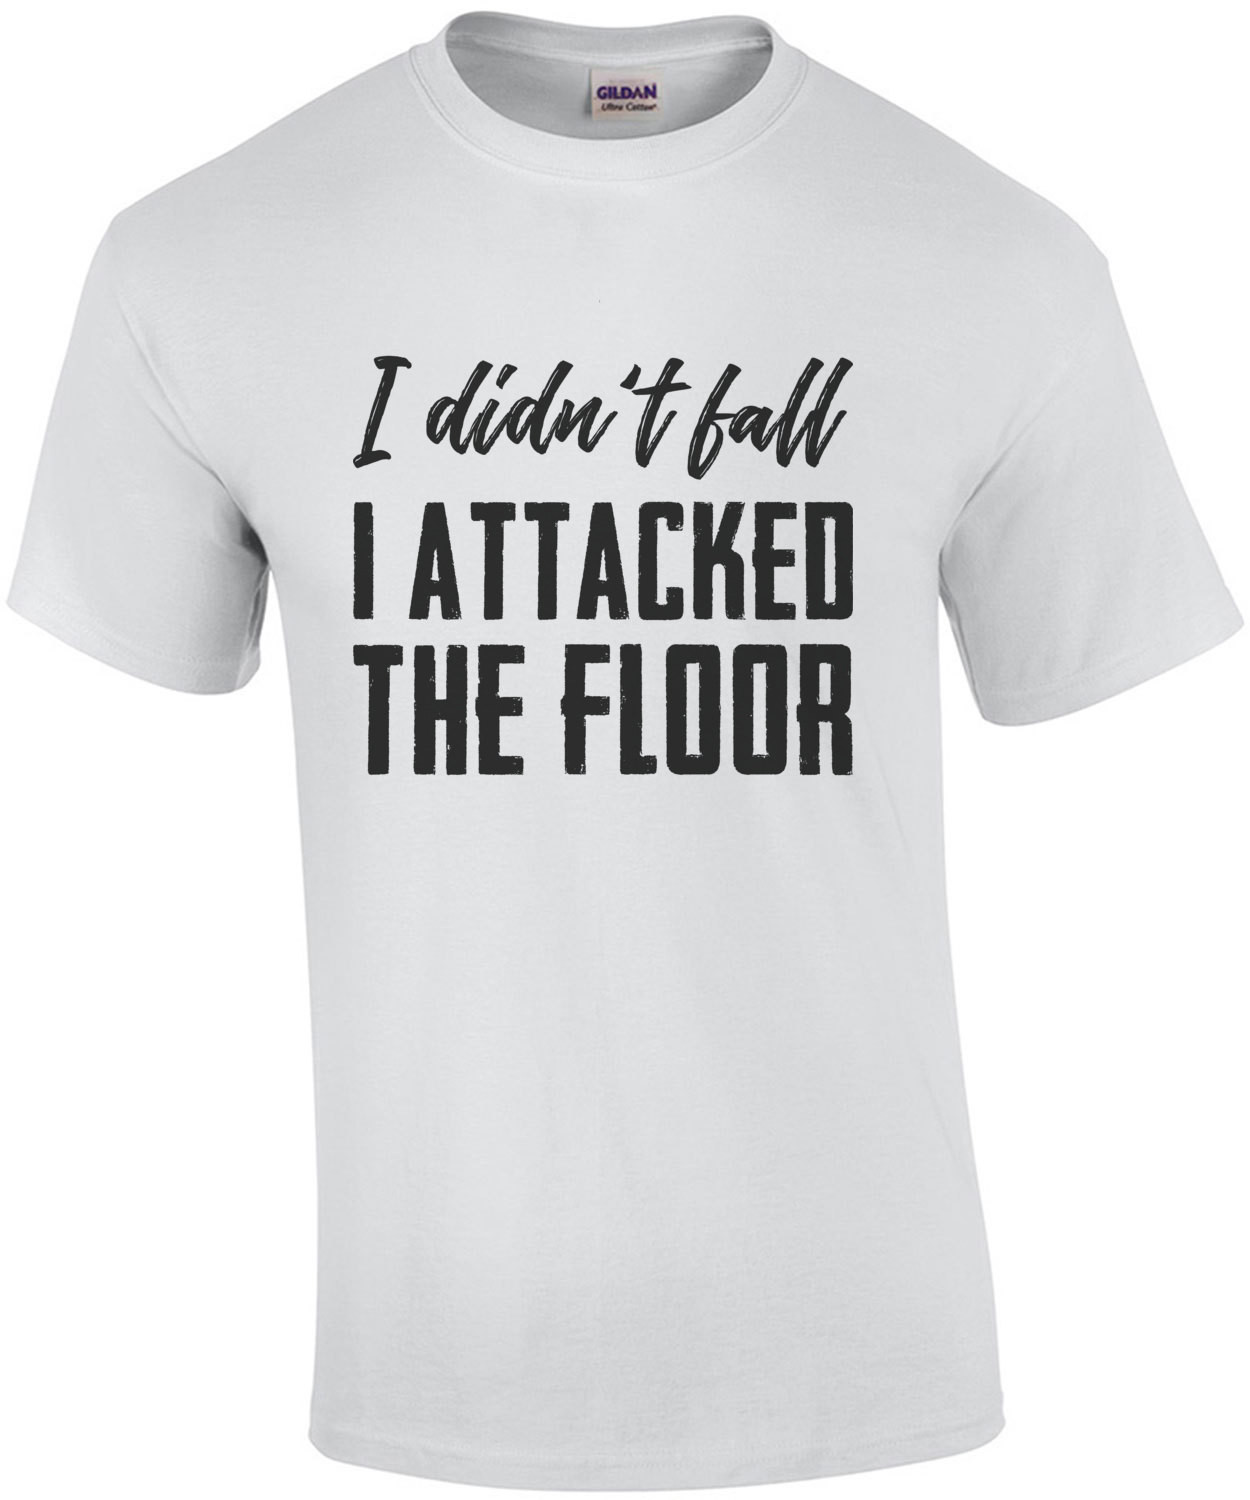 I didn't fall - I attacked the floor - funny t-shirt